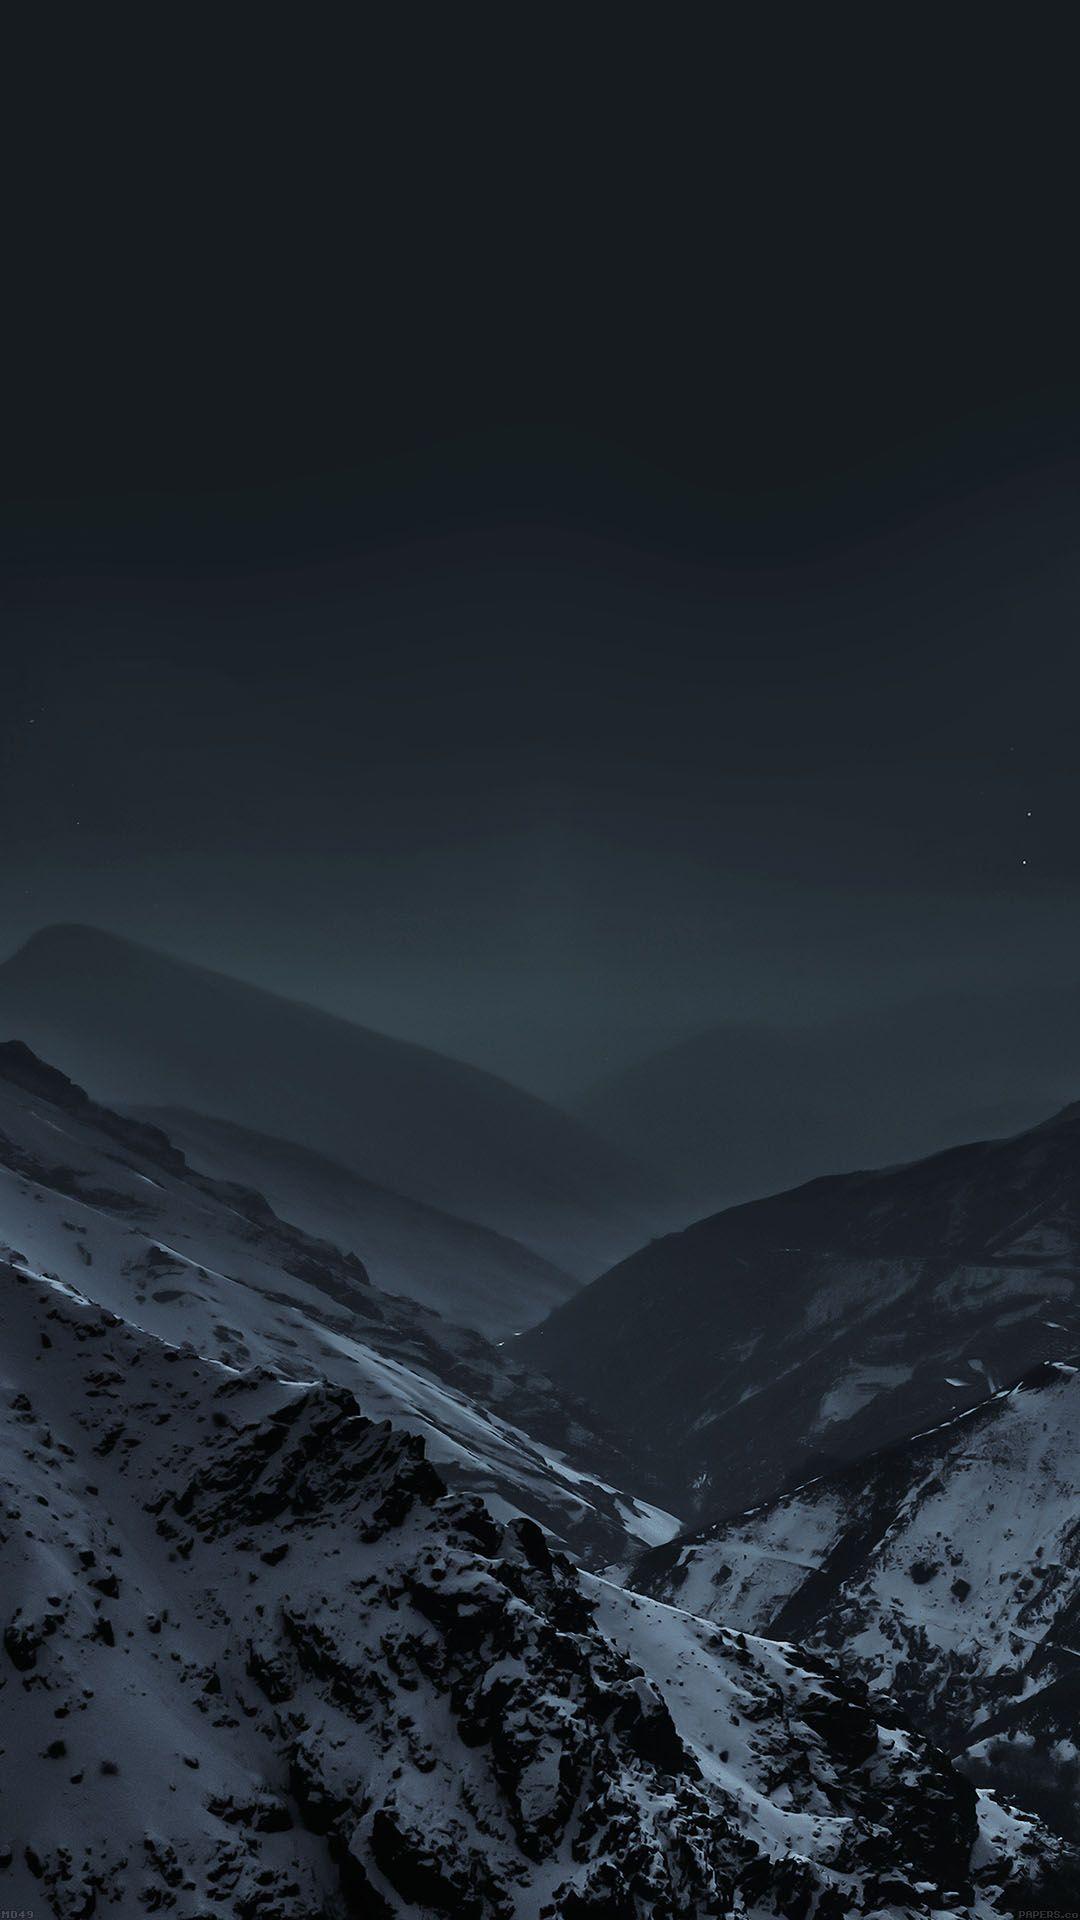 Wallpapers Weekends: The Mountains for iPhone 6